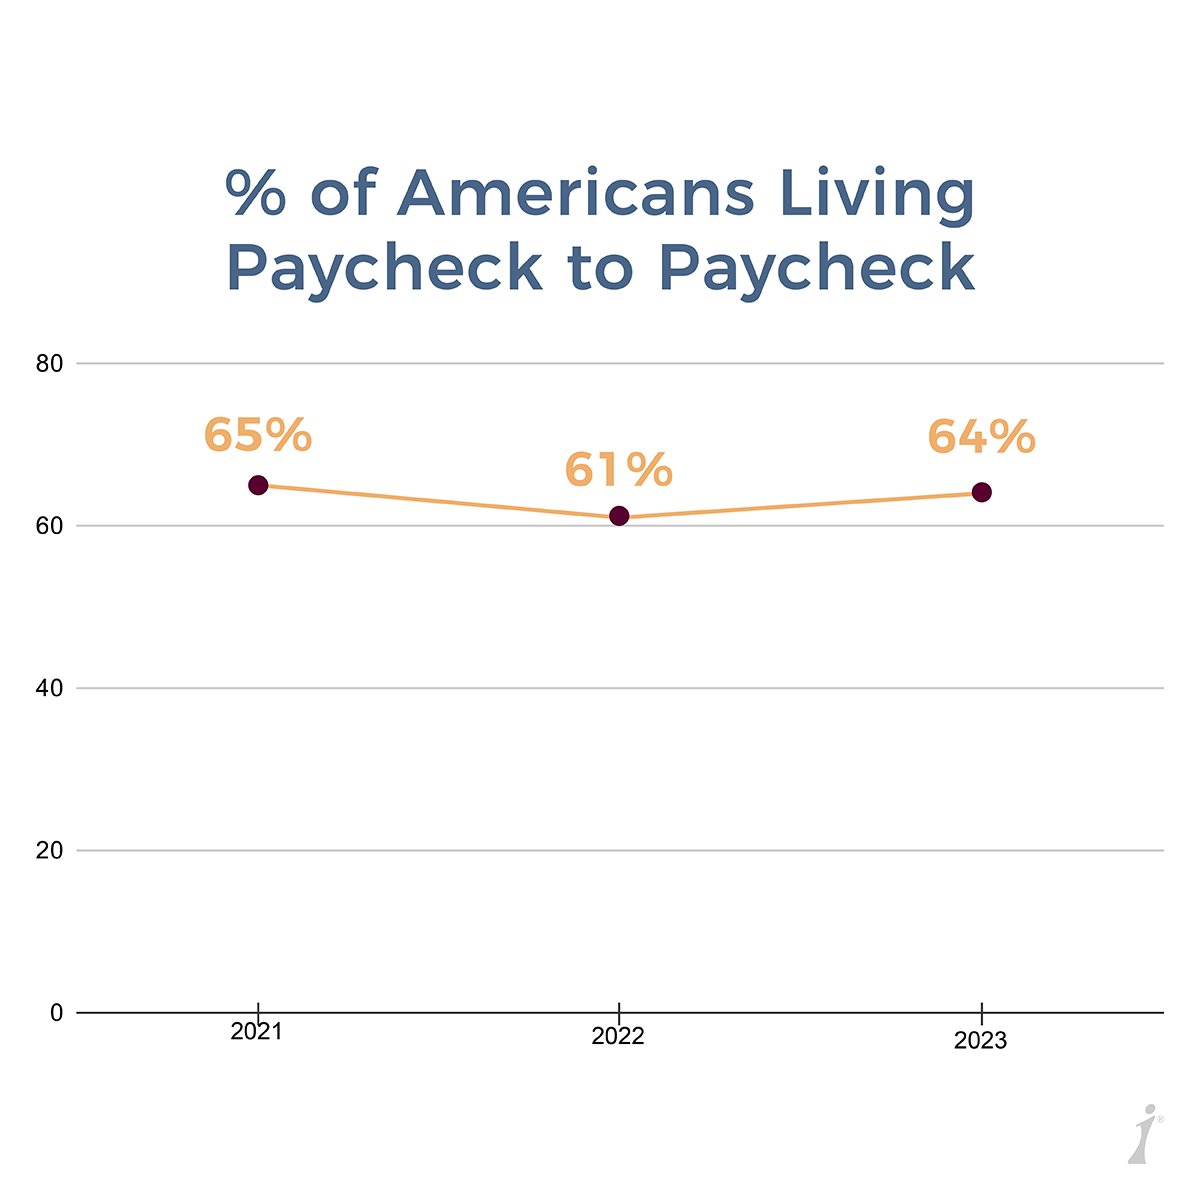 ⚠️ 64% of Modern Day Americans are living paycheck to paycheck ⚠️
The solution? Advancing policies that aren’t just well-intentioned, but work! Read the #WorkingForWomen report:  iwf.org/working-for-wo…